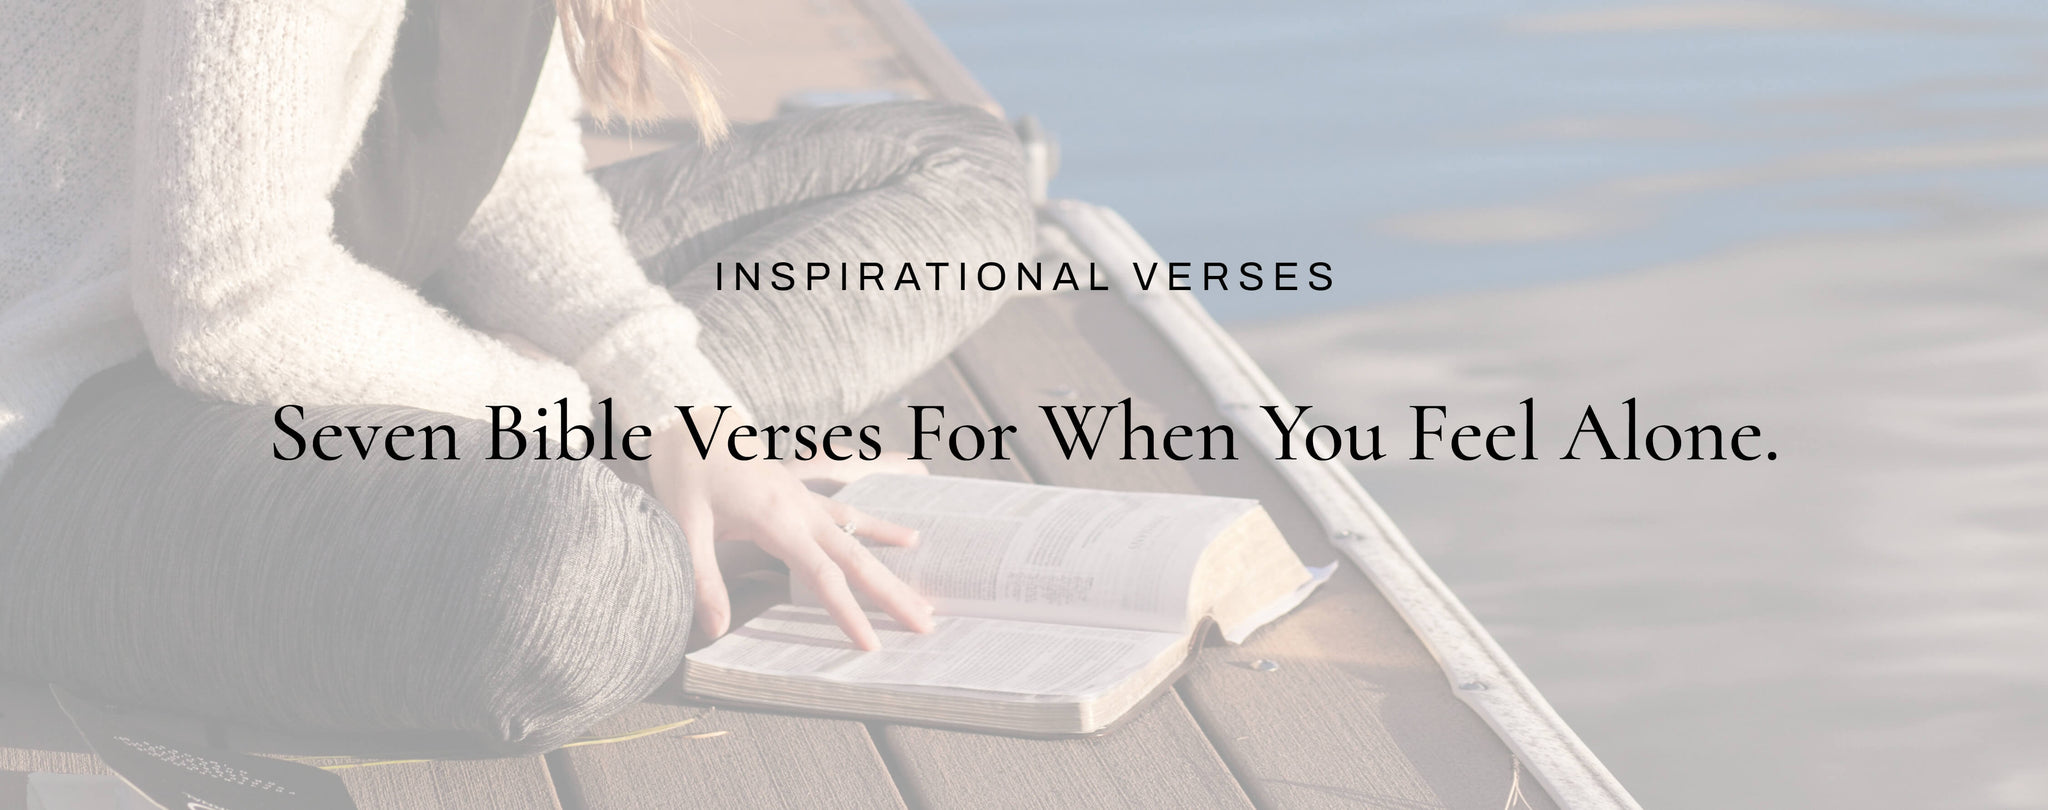 7 Bible Verses for When You Feel Alone | Lord's Guidance